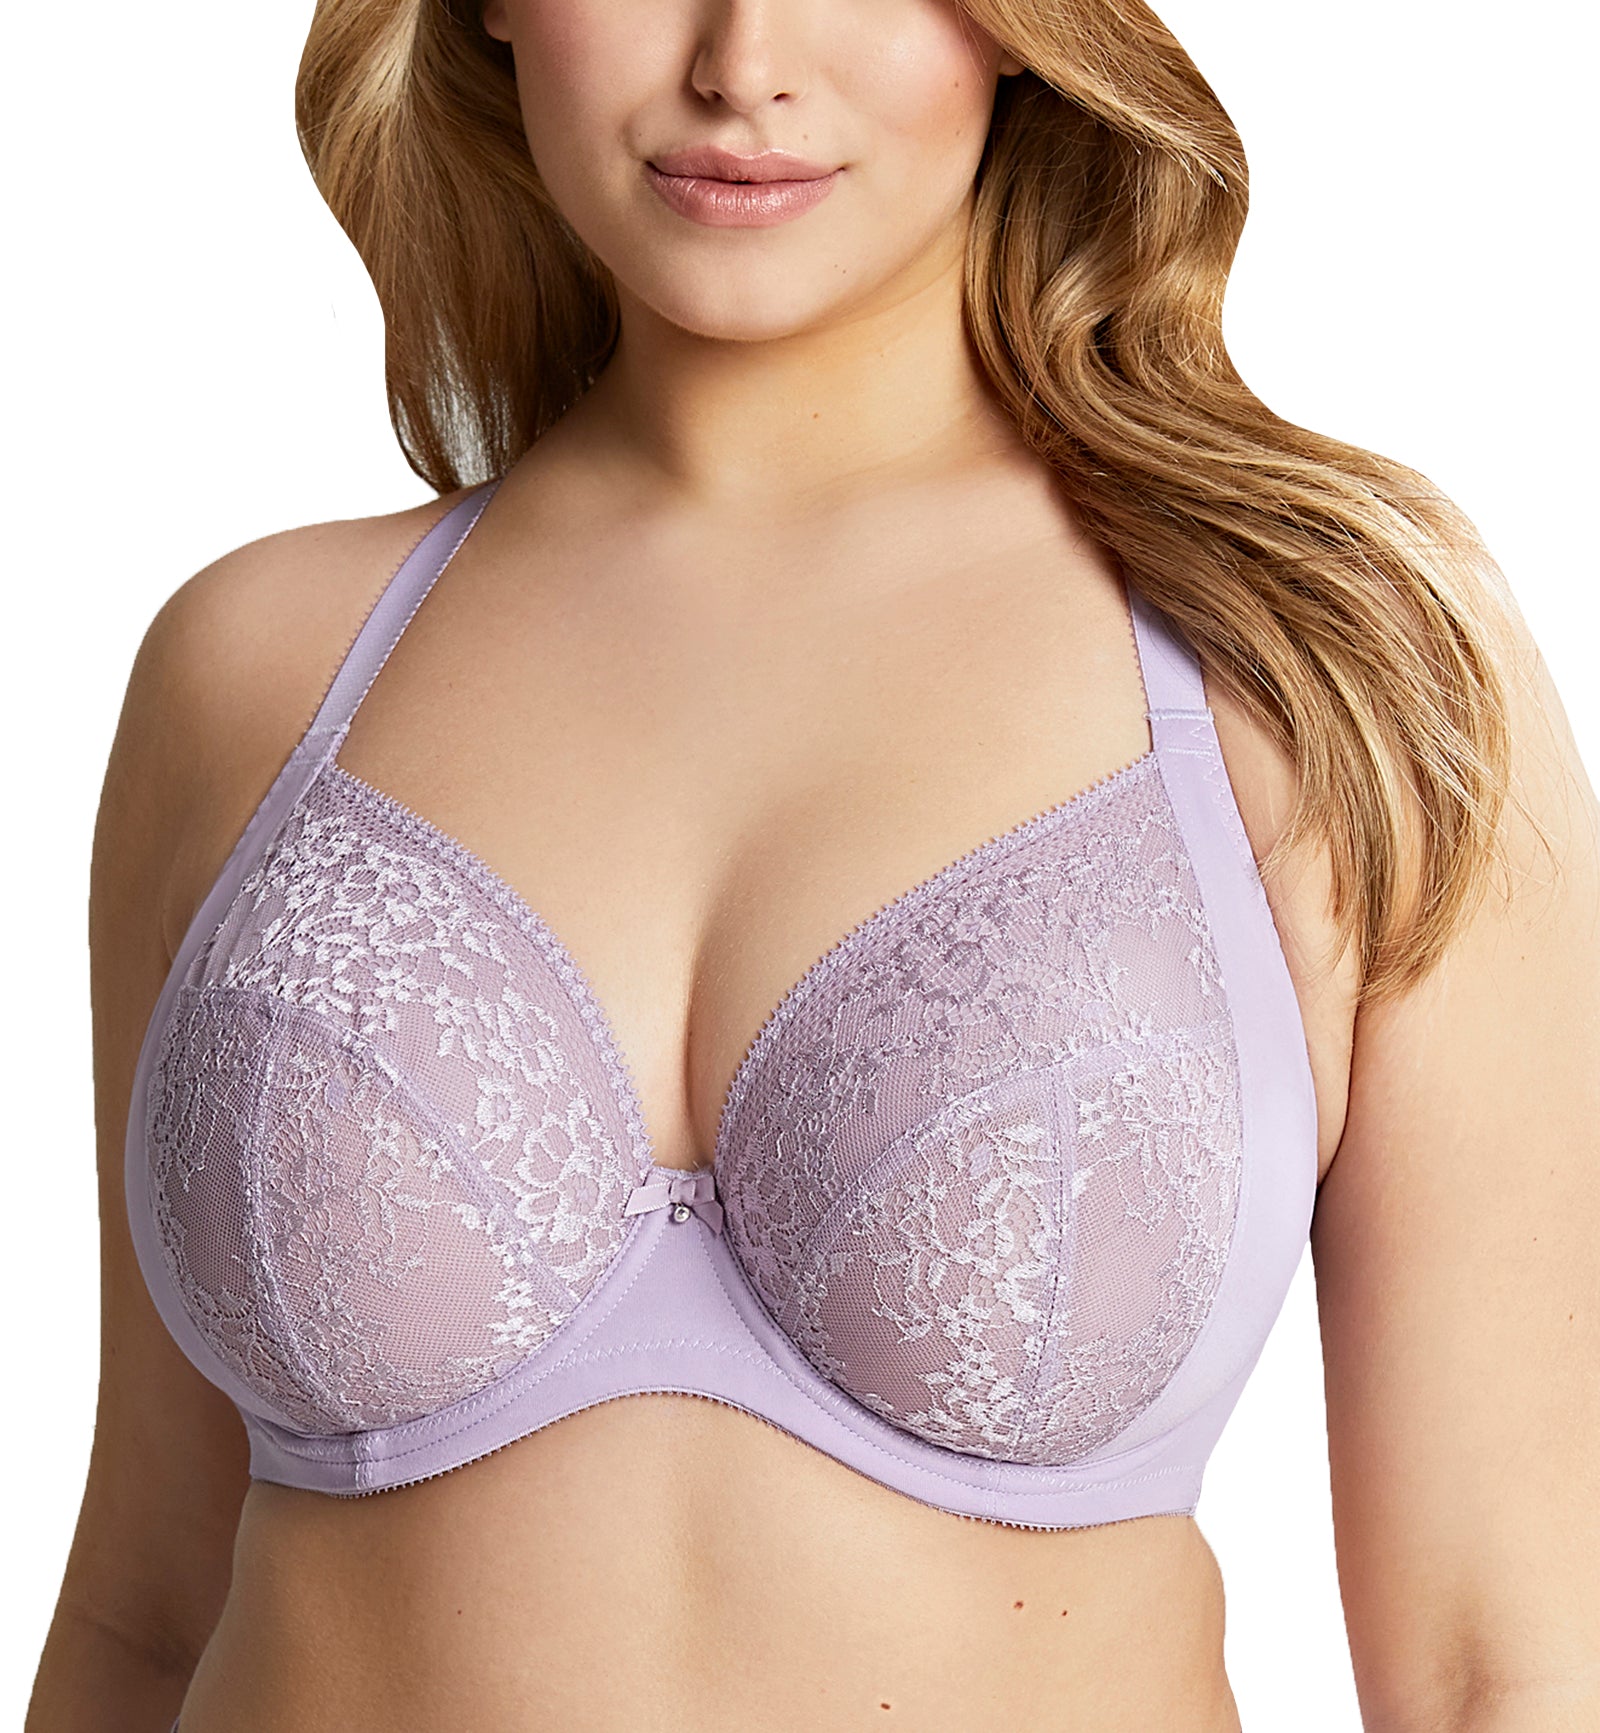 PANACHE ESTEL non padded push-up bra Available in size 36GG, 36H